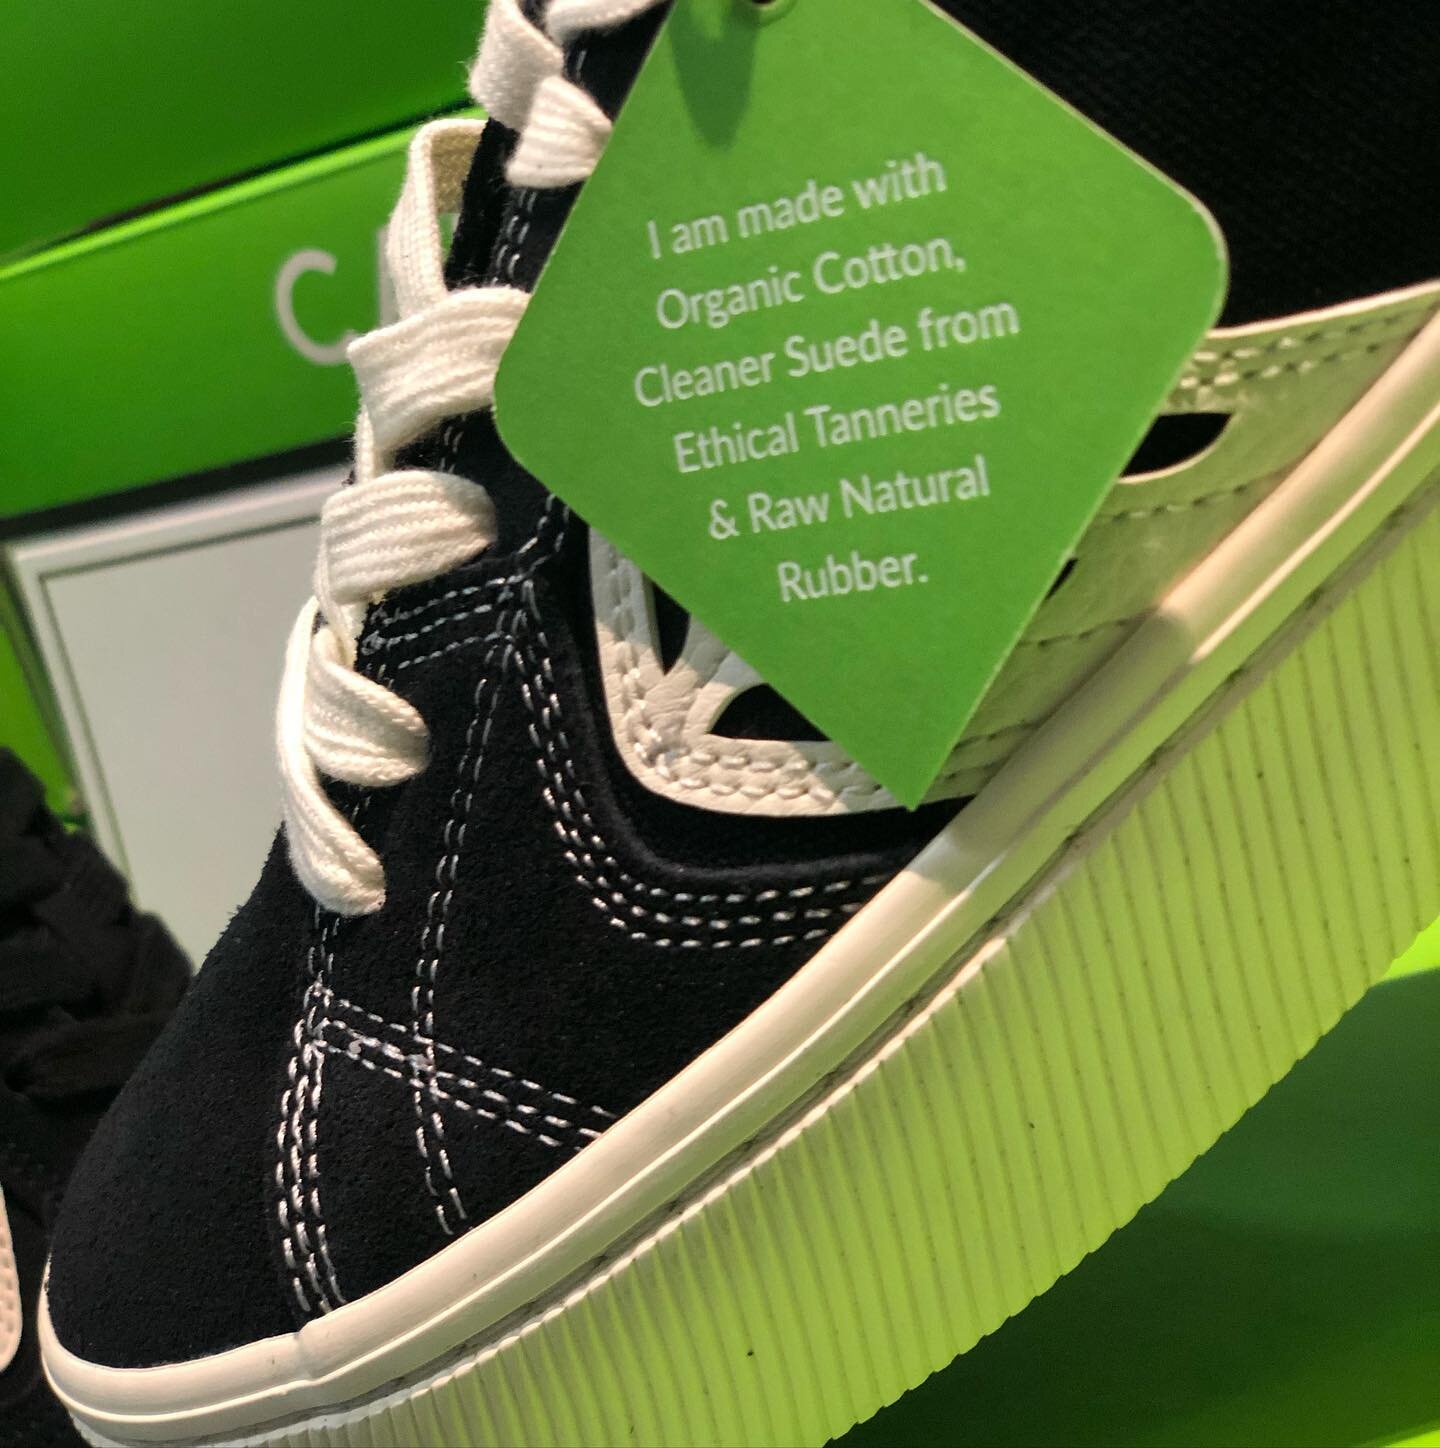 @cariuma we believe in making thinks in a way that&rsquo;s better for people &amp; the planet. 😇

First full vegan, comfy und good looking sneakers 🤩

Best part, get a pair, plant 2 trees to help our planet ☺️ 

Get urs @ sports and trends 🥴

All 